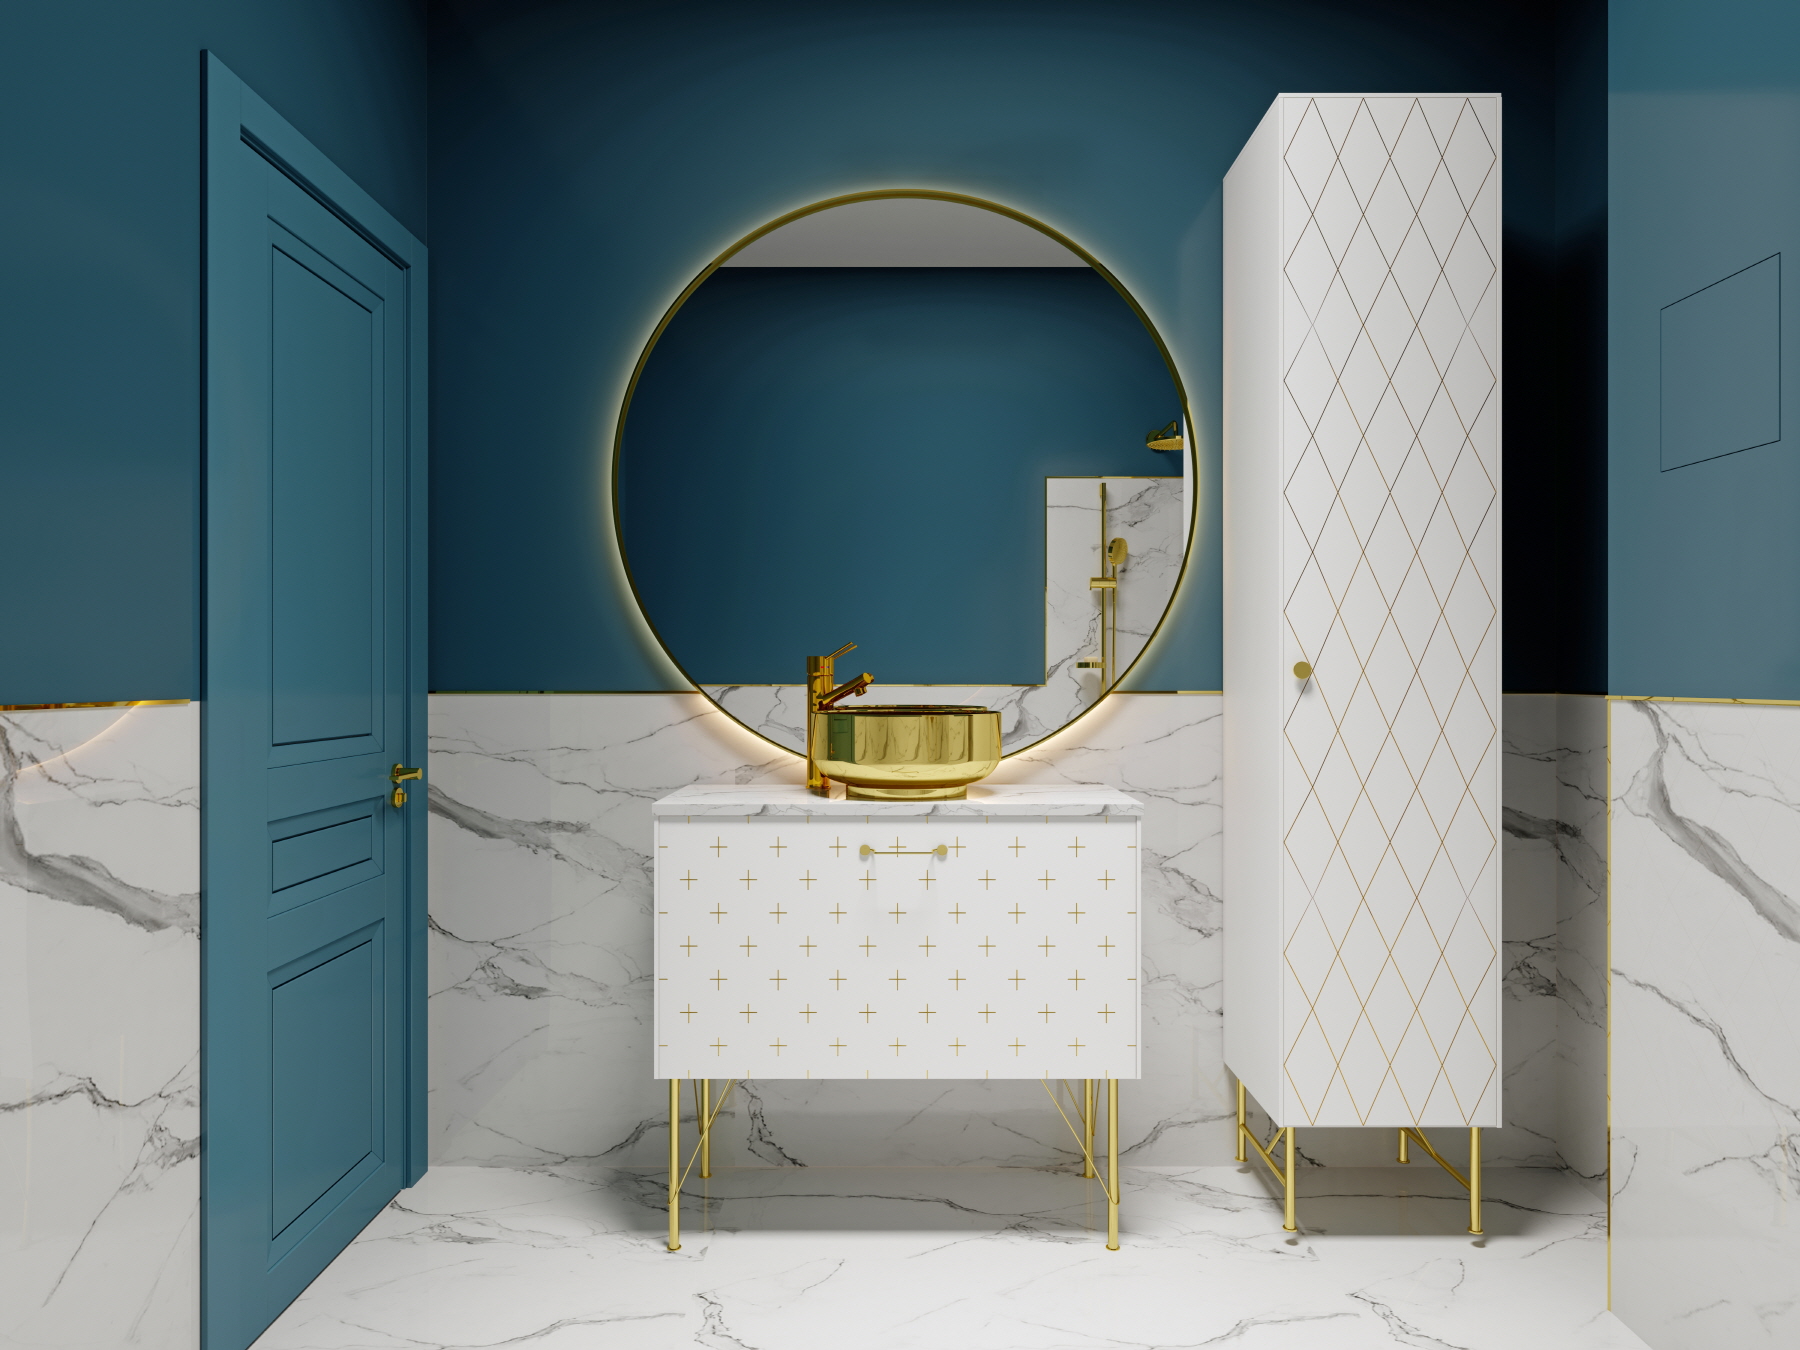 Teal adds energy and depth to create a luxurious bathroom ambiance.